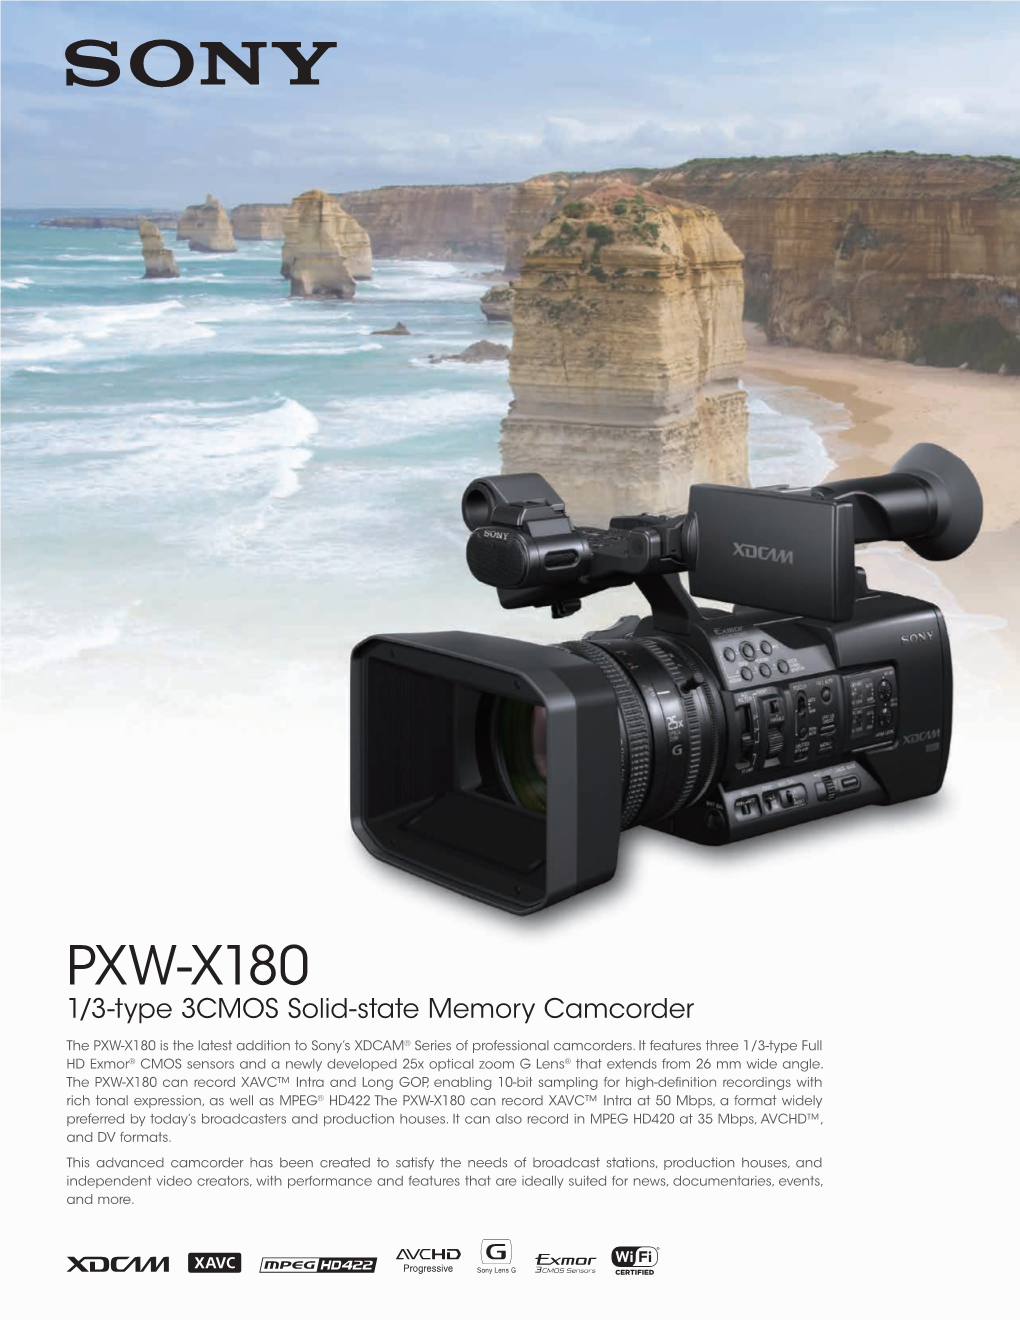 PXW-X180 1/3-Type 3CMOS Solid-State Memory Camcorder